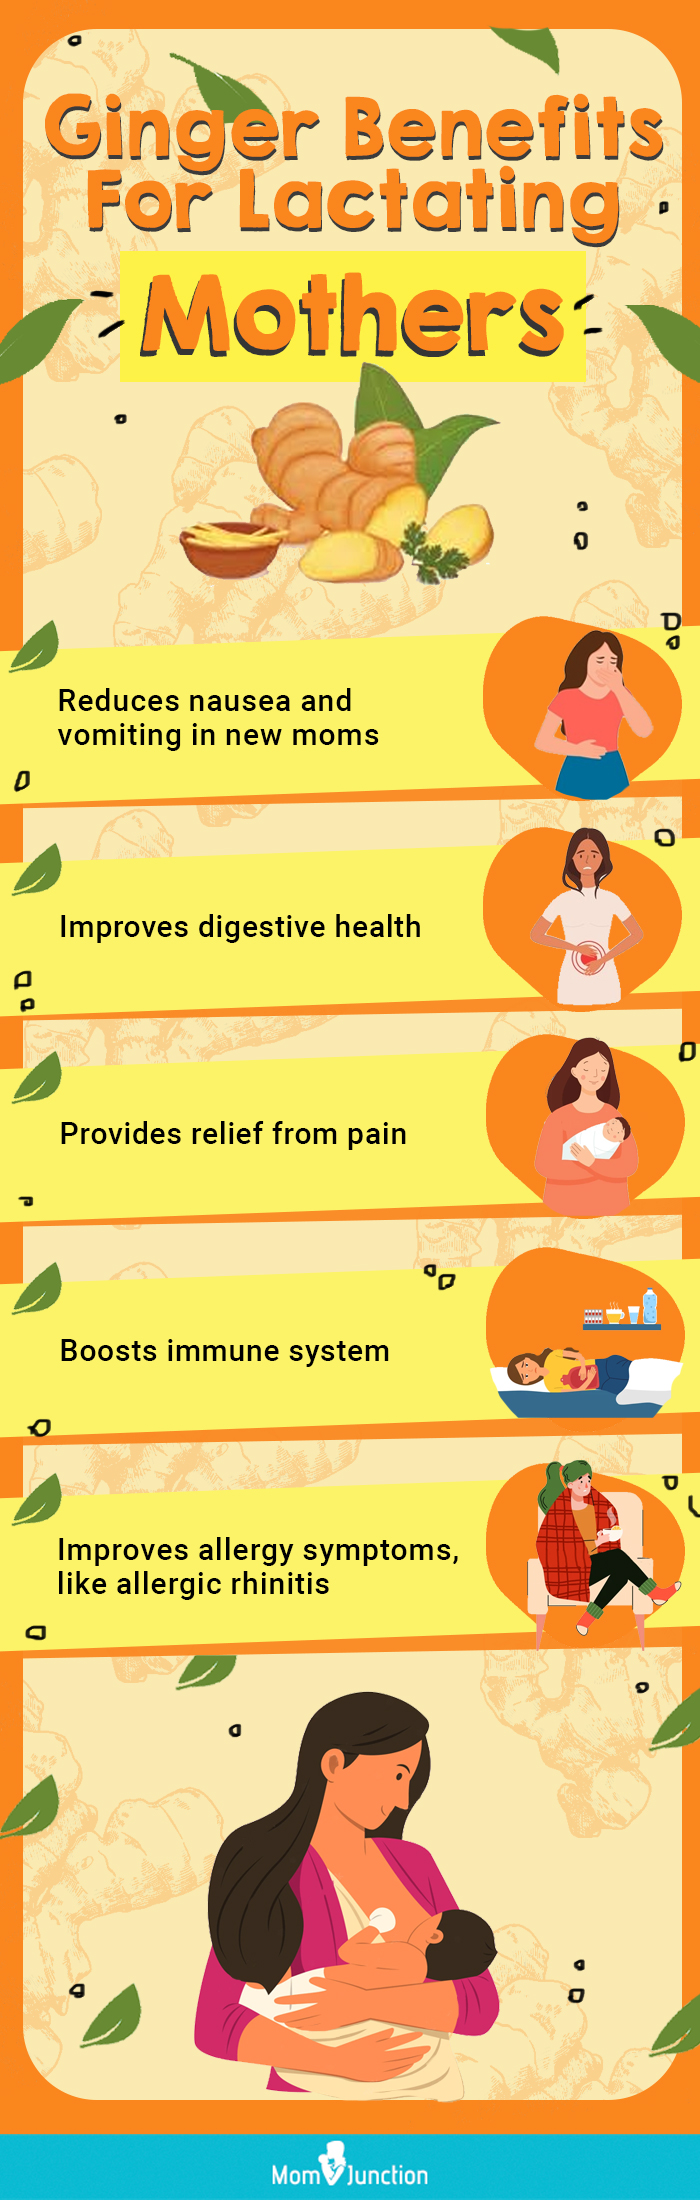 ginger benefits for lactating mothers (infographic)